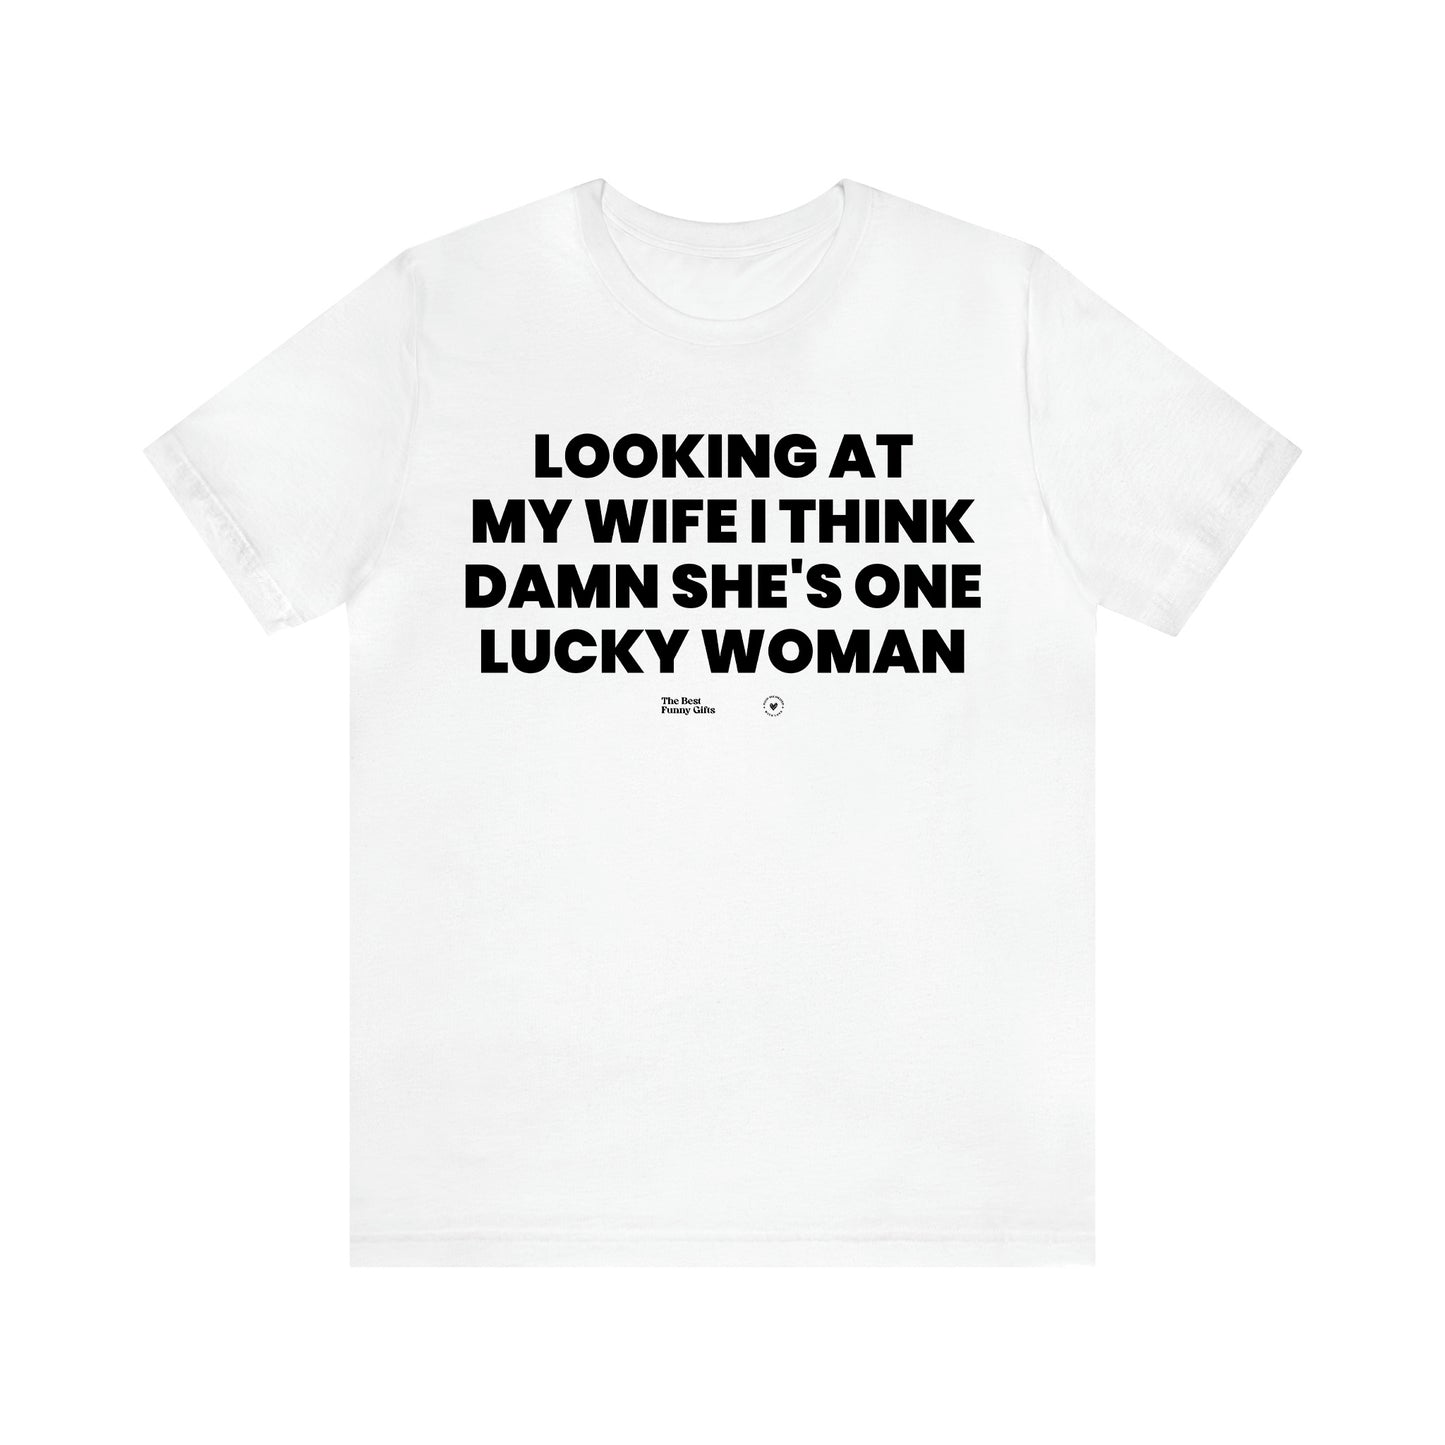 Men's T Shirts Looking at My Wife I Think Damn She's One Lucky Woman - The Best Funny Gifts